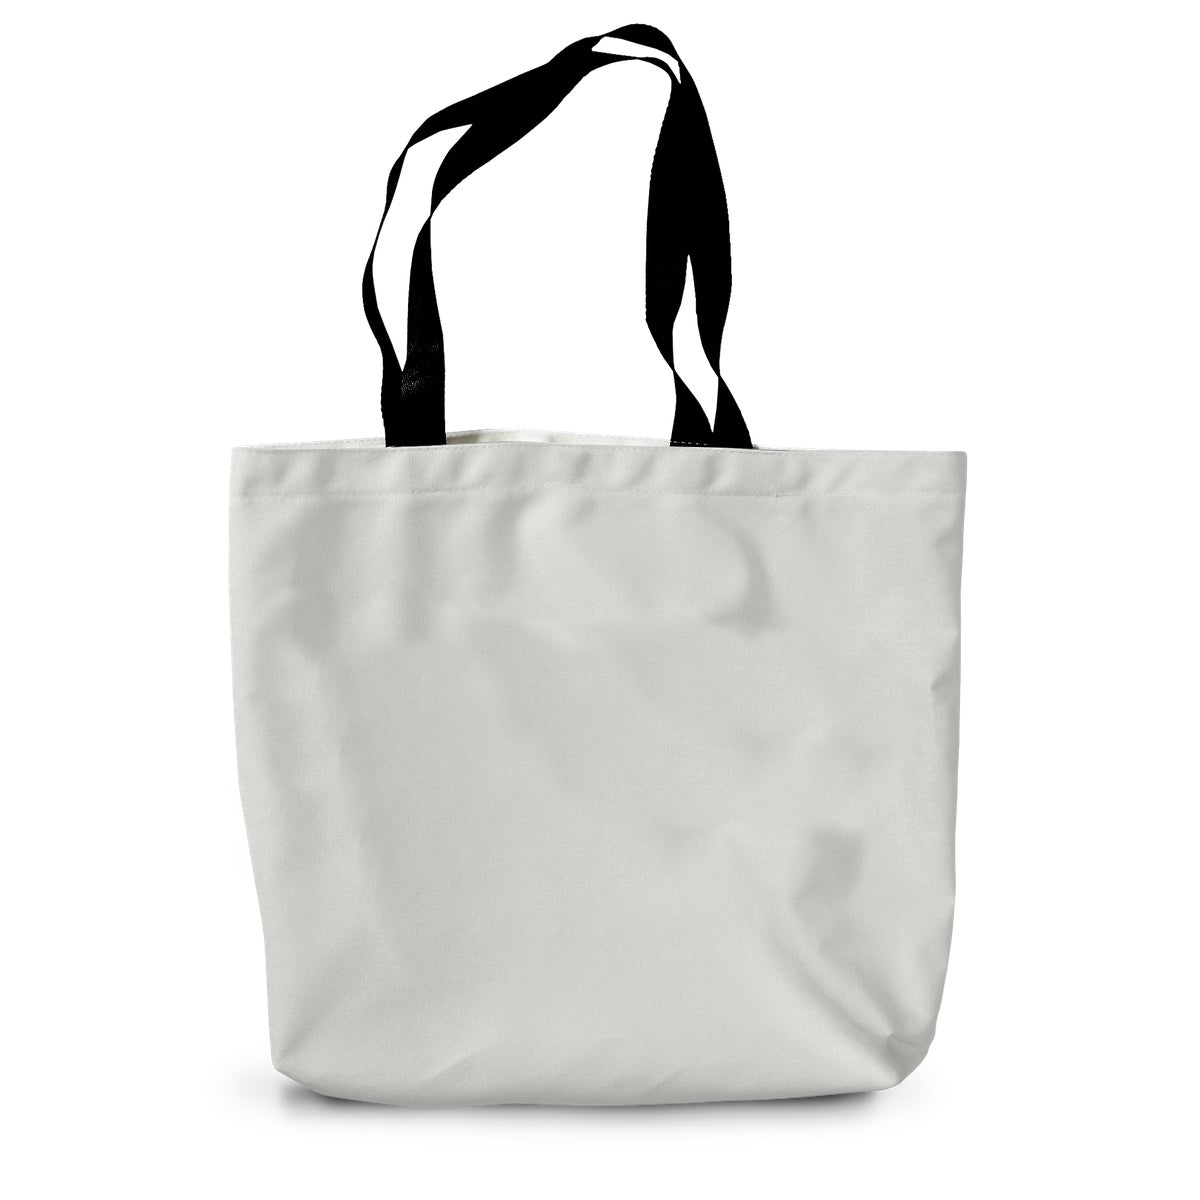 The Great Ridge Canvas Tote Bag